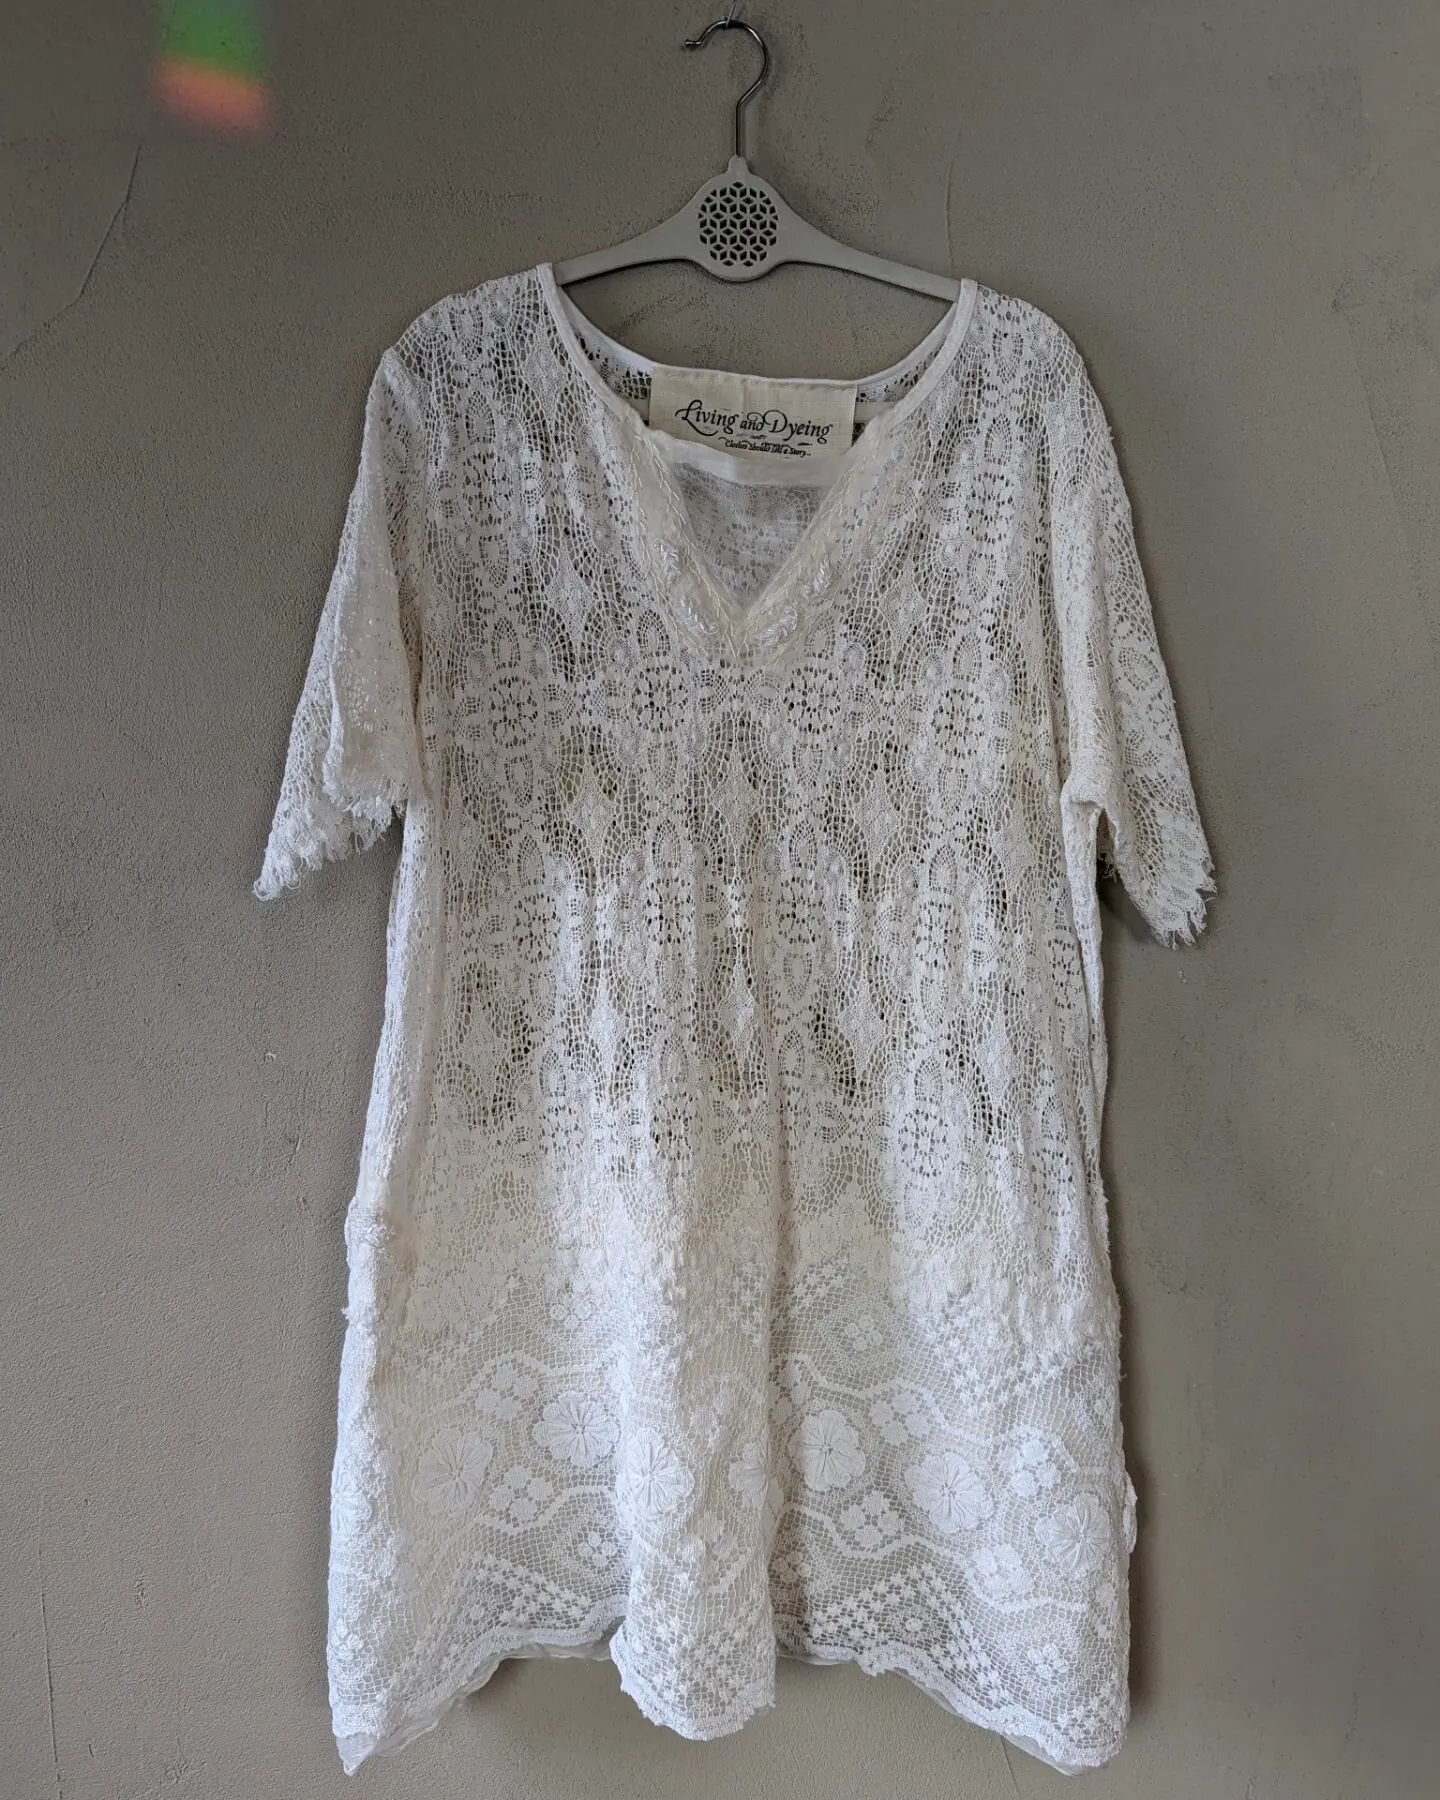 Large lacey tunic with hand embroidery and sleeves. #livinganddyeing #nunofelted #madeoffthegrid #ecofriendly